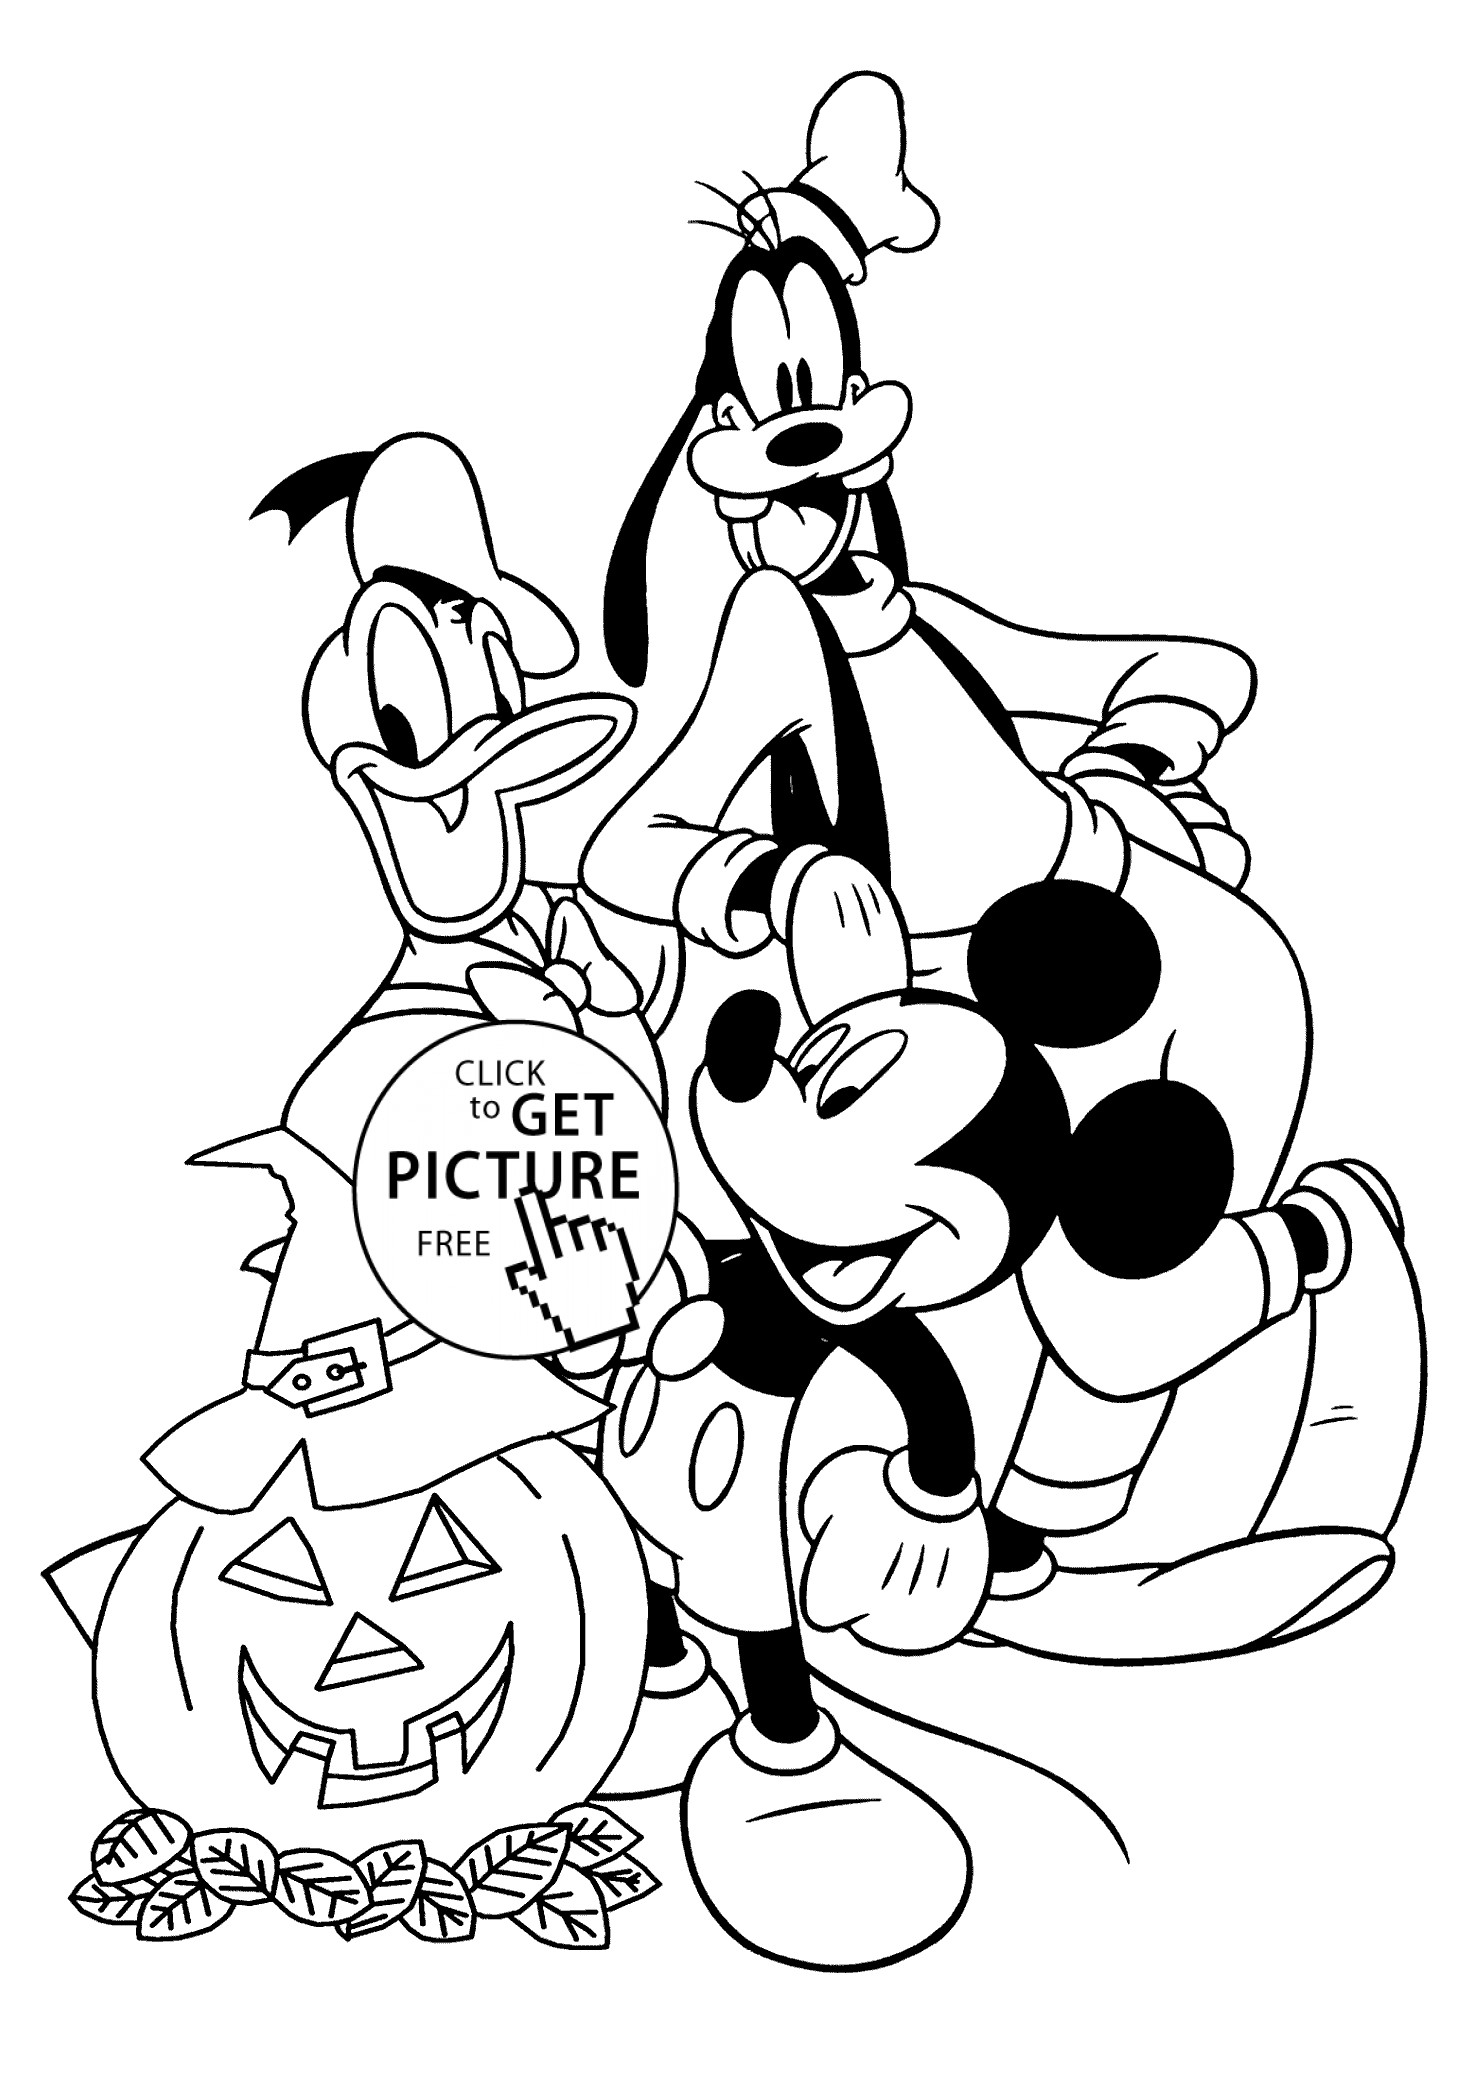 Free Coloring Sheets Disney
 Halloween Disney characters coloring page for kids